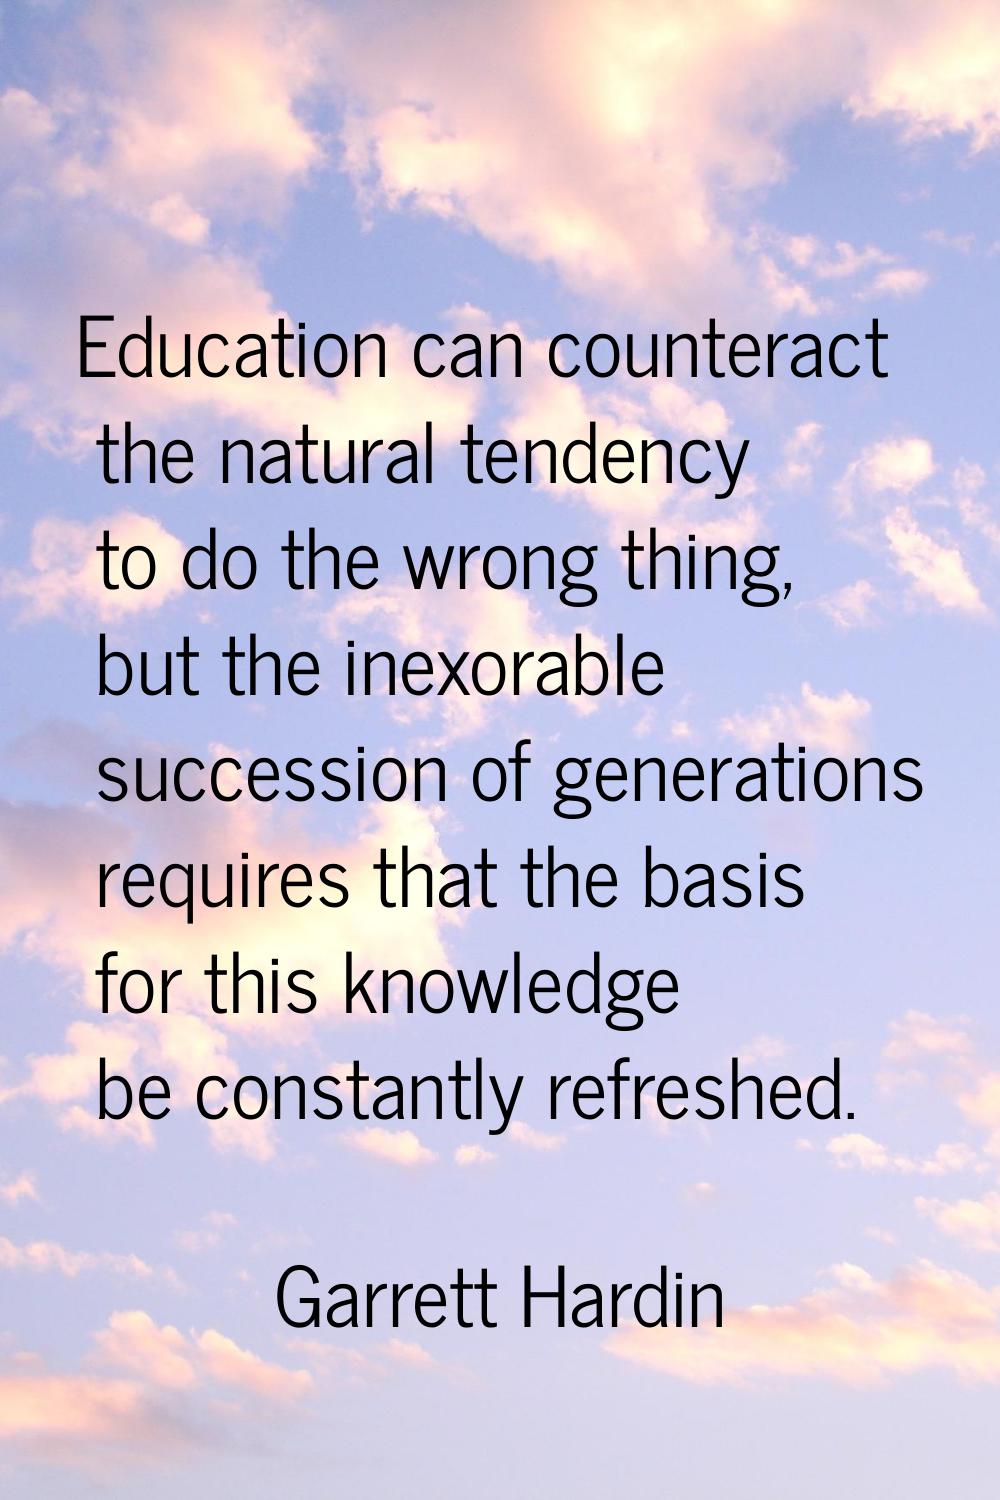 Education can counteract the natural tendency to do the wrong thing, but the inexorable succession 